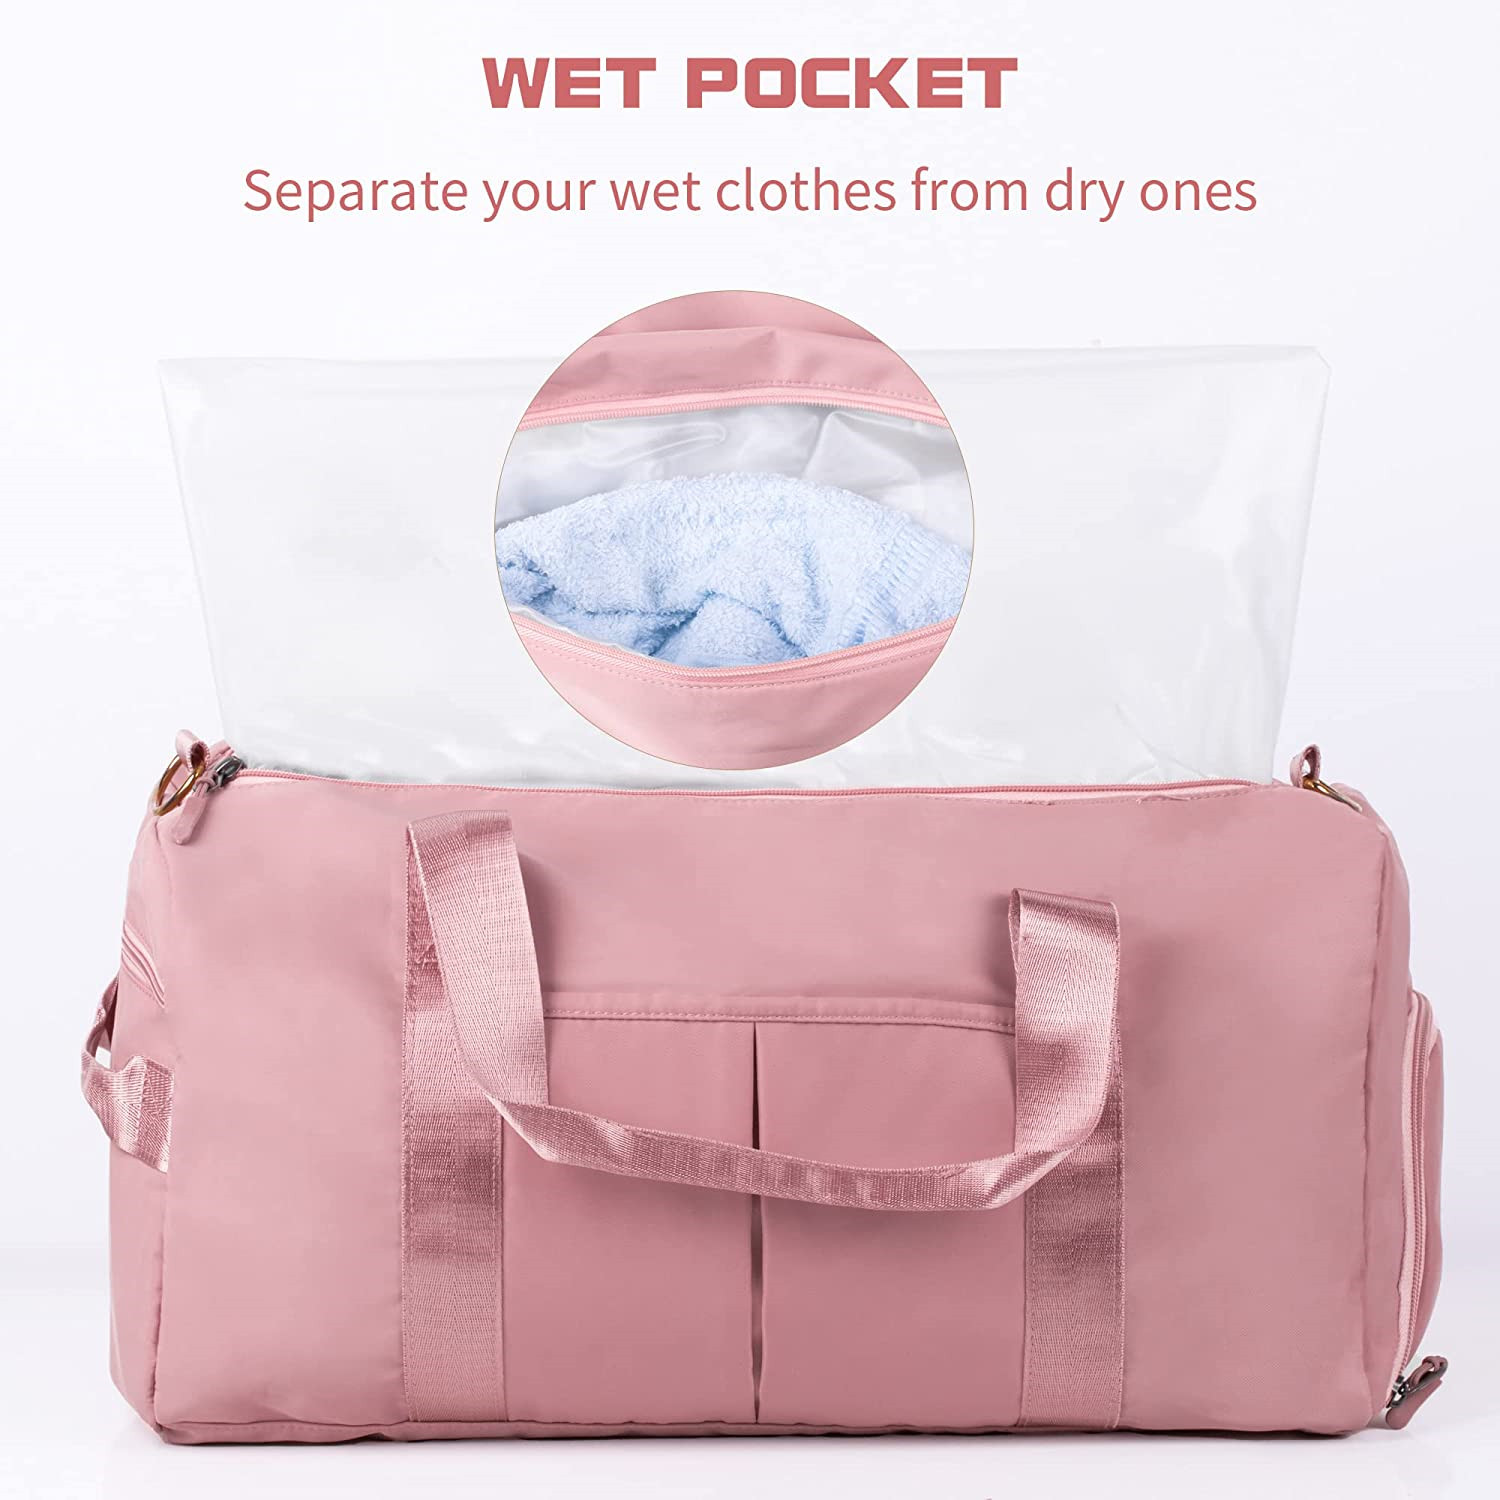 2021 New Sports Wet And Dry Separation Nylon Waterproof Sports Swimming Gym Duffle Bag Pink Gym Bag